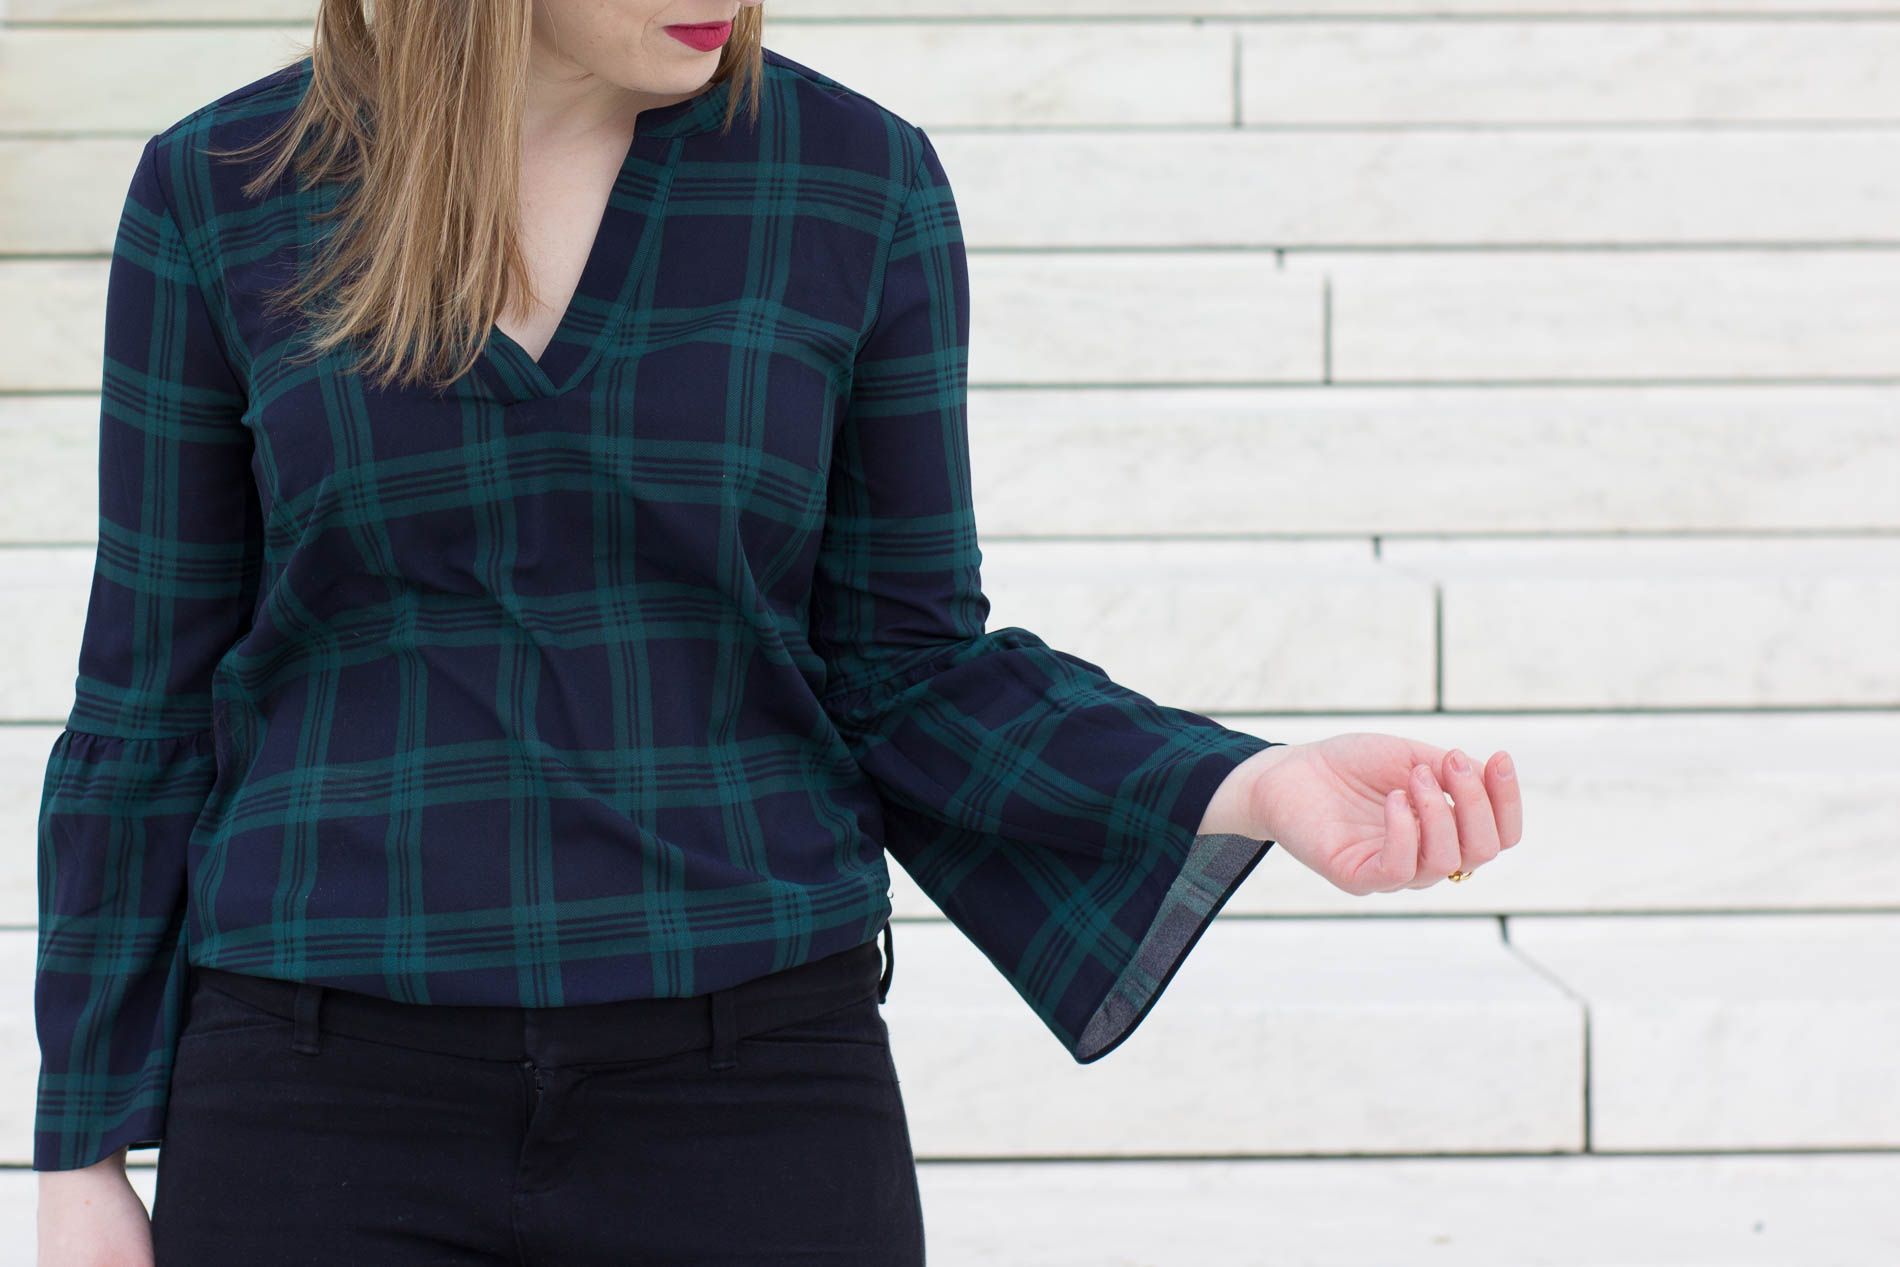 The Office Holiday Party | Something Good, @danaerinw, j.crew factory bell sleeve top, plaid top